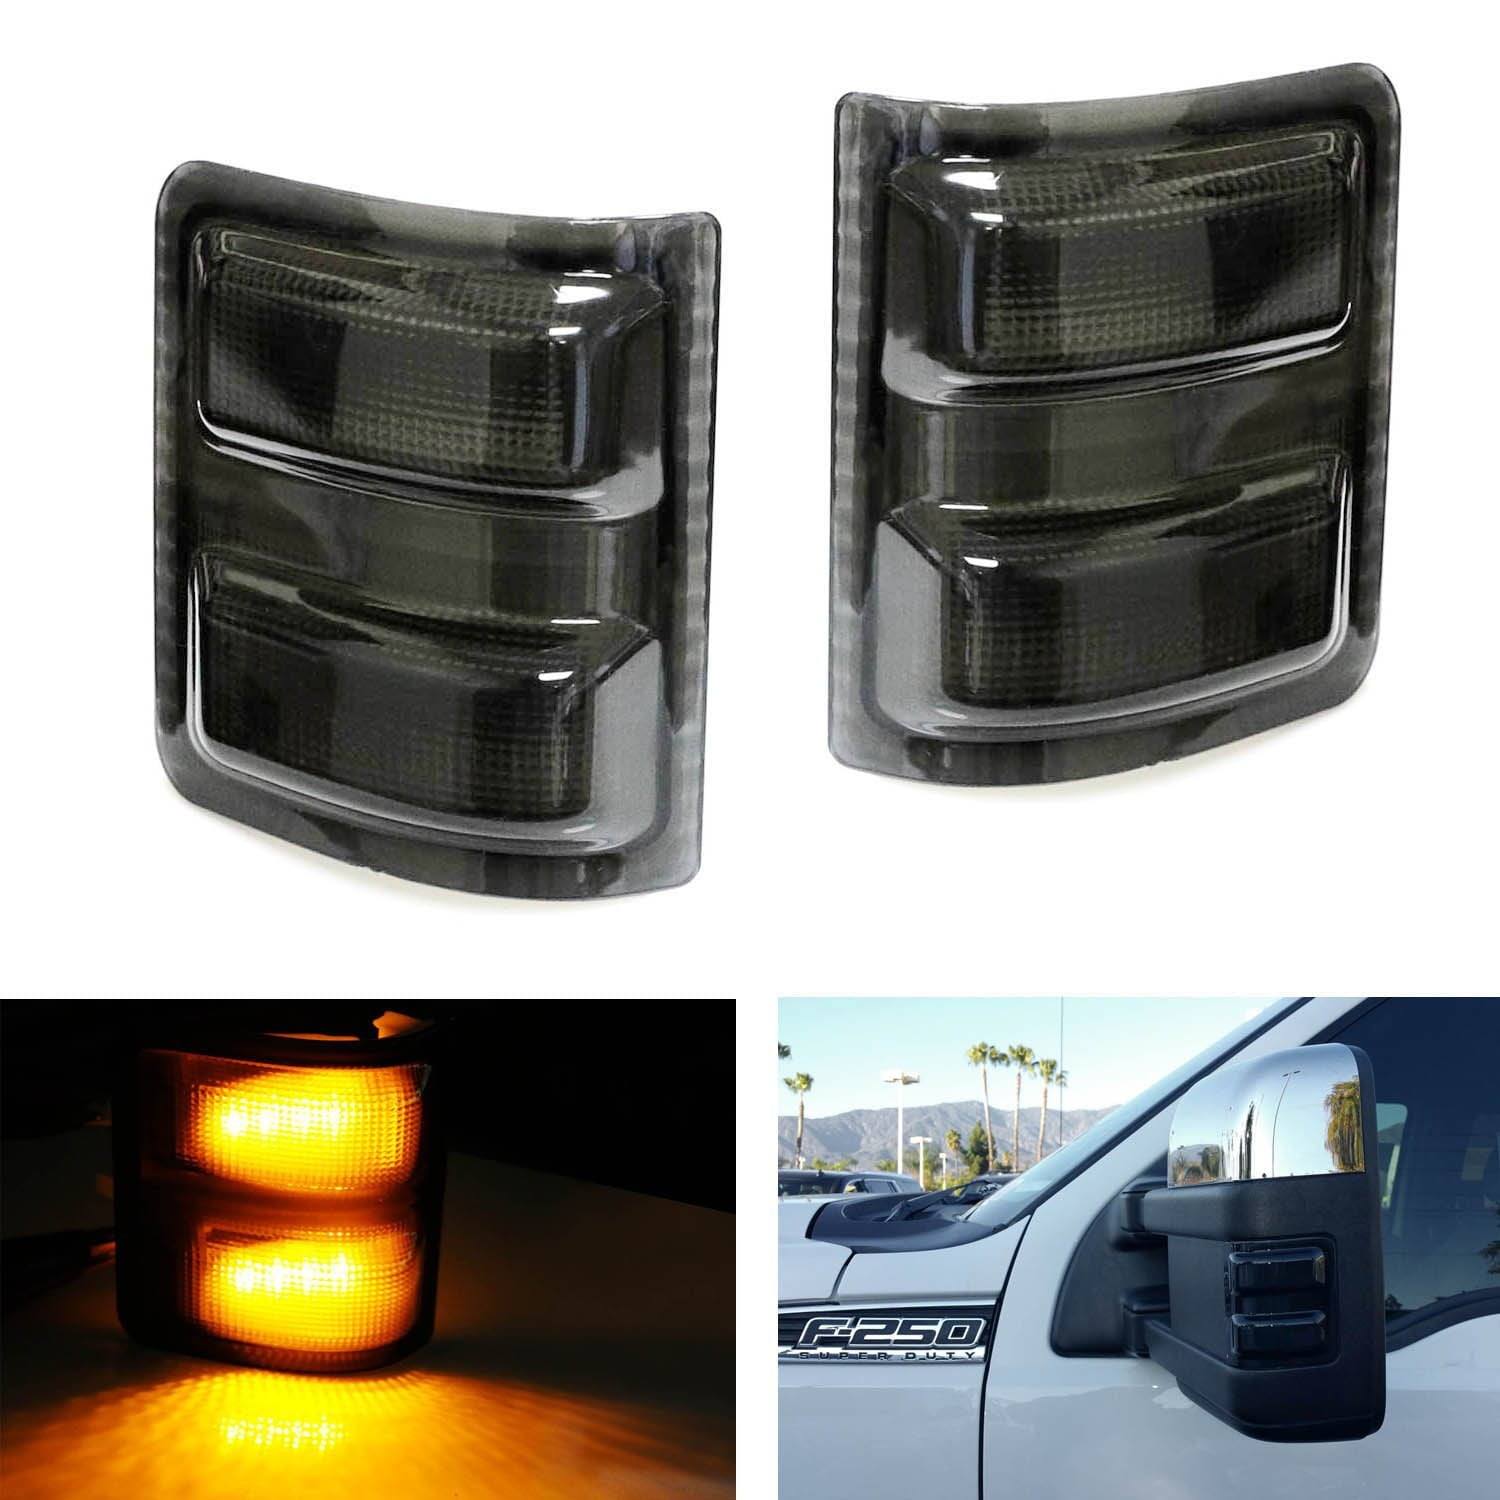 Haitzu LED Sequential Switchback Side Mirror Marker 3-Row Running& Turn Signal Light Smoked Lens Replacement 2008-2016 F250 F350 F450 F550 Super Duty White Running/Parking Light Amber Dual Color 2Pcs 